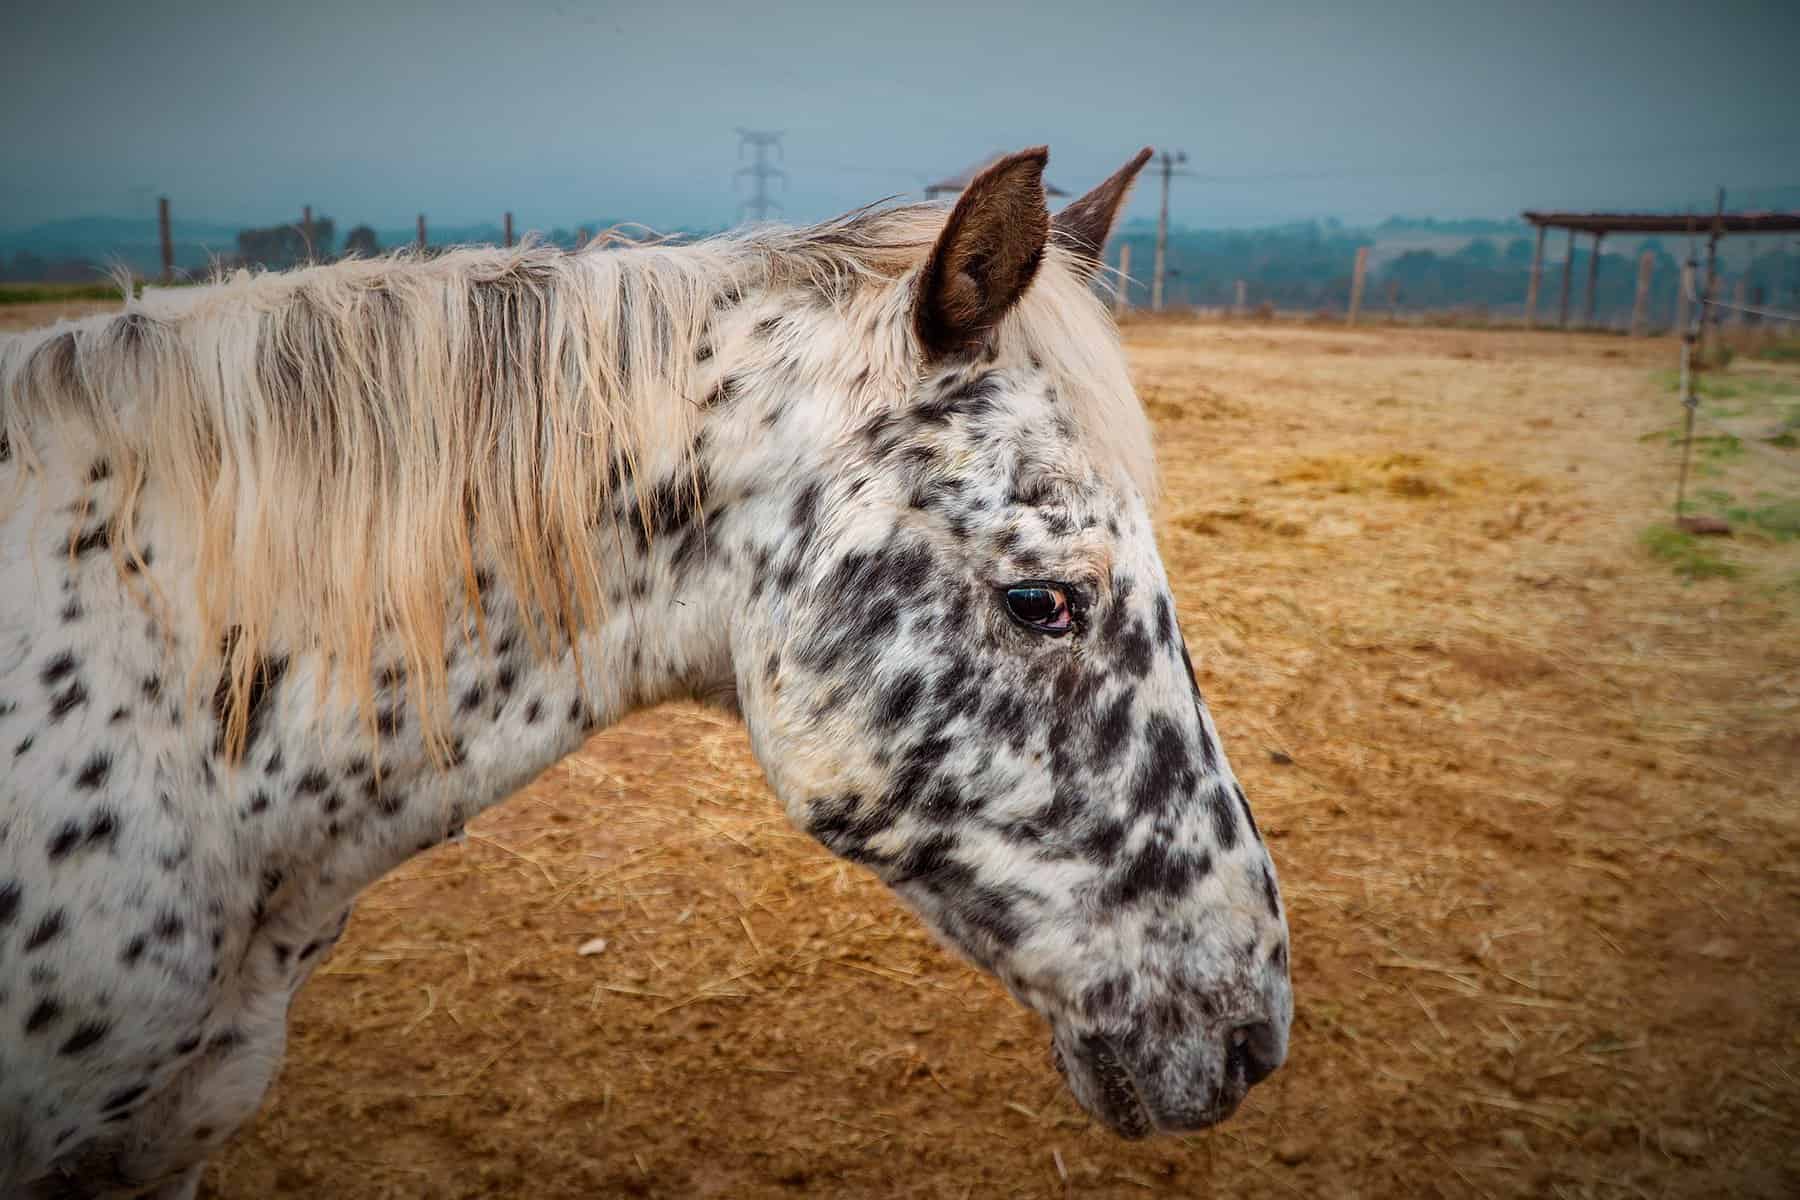 Leopard-spotted horse